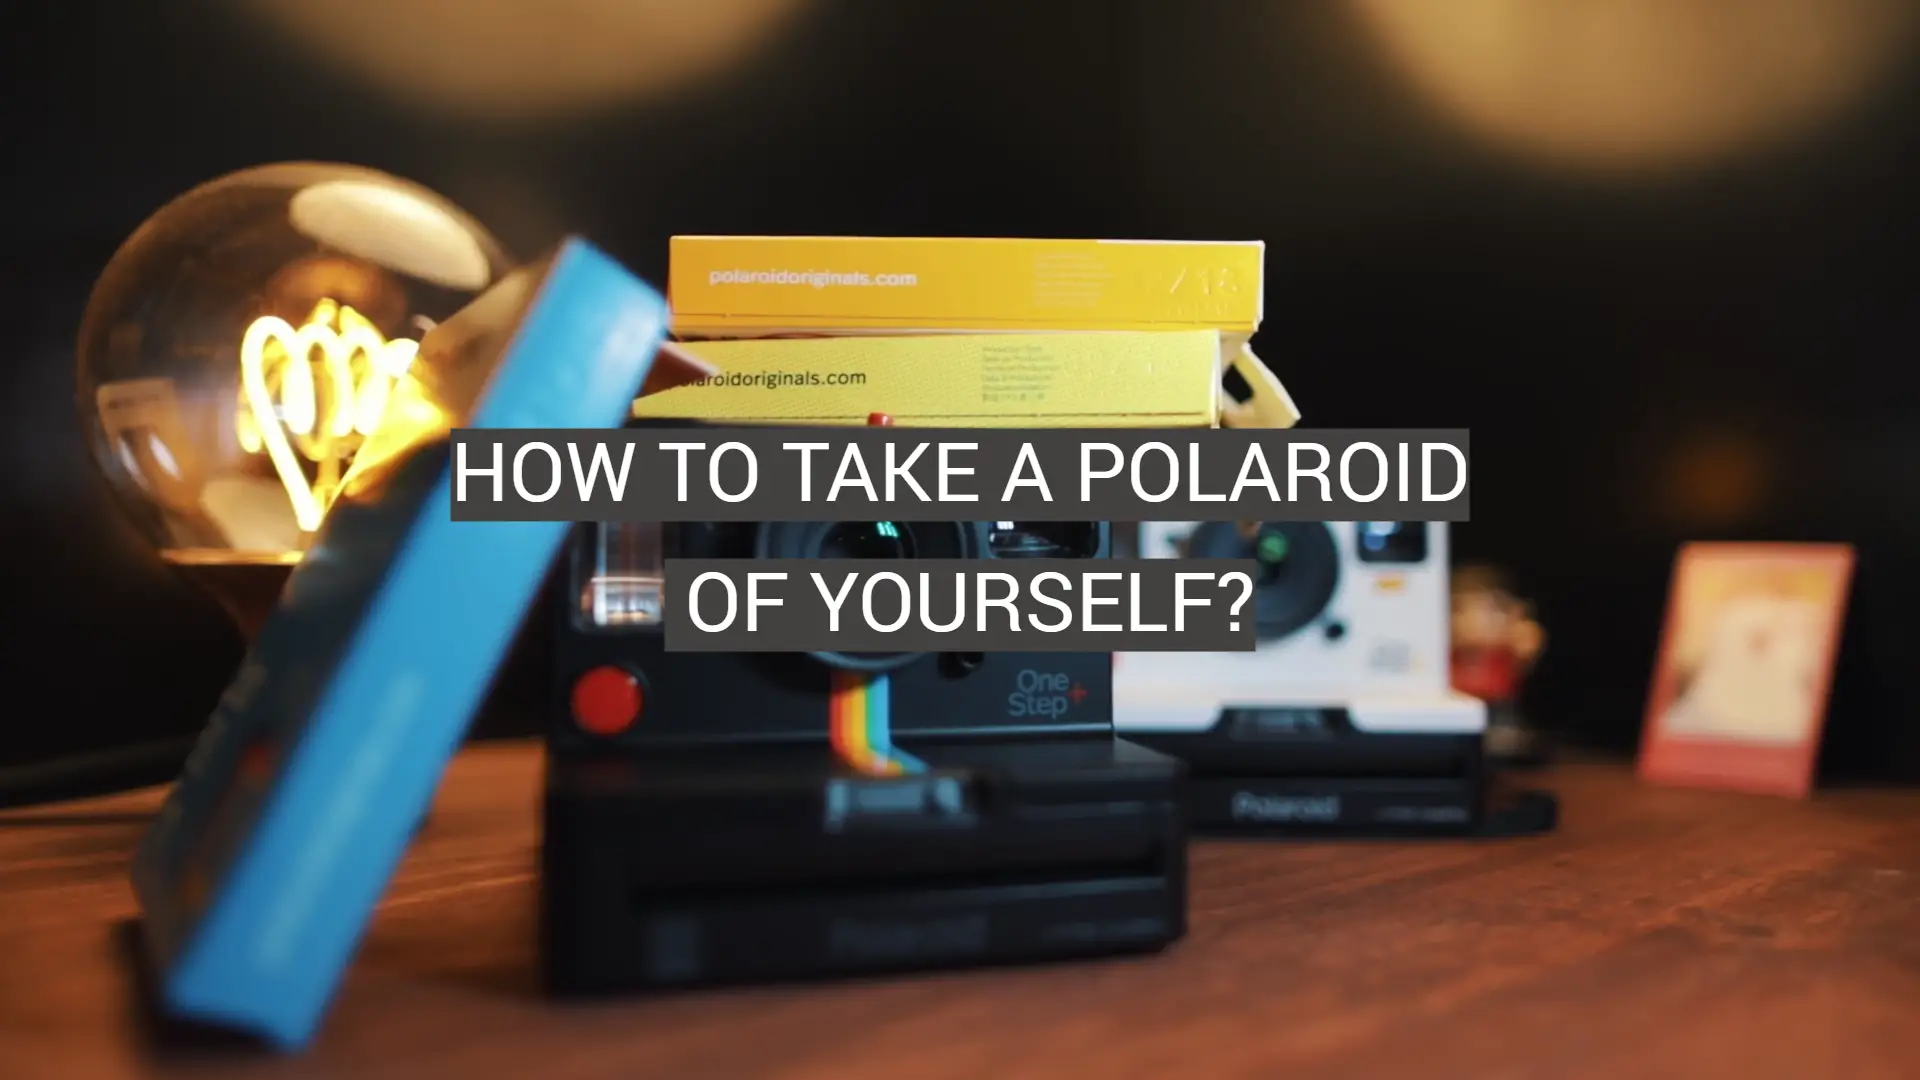 How to Take a Polaroid of Yourself?